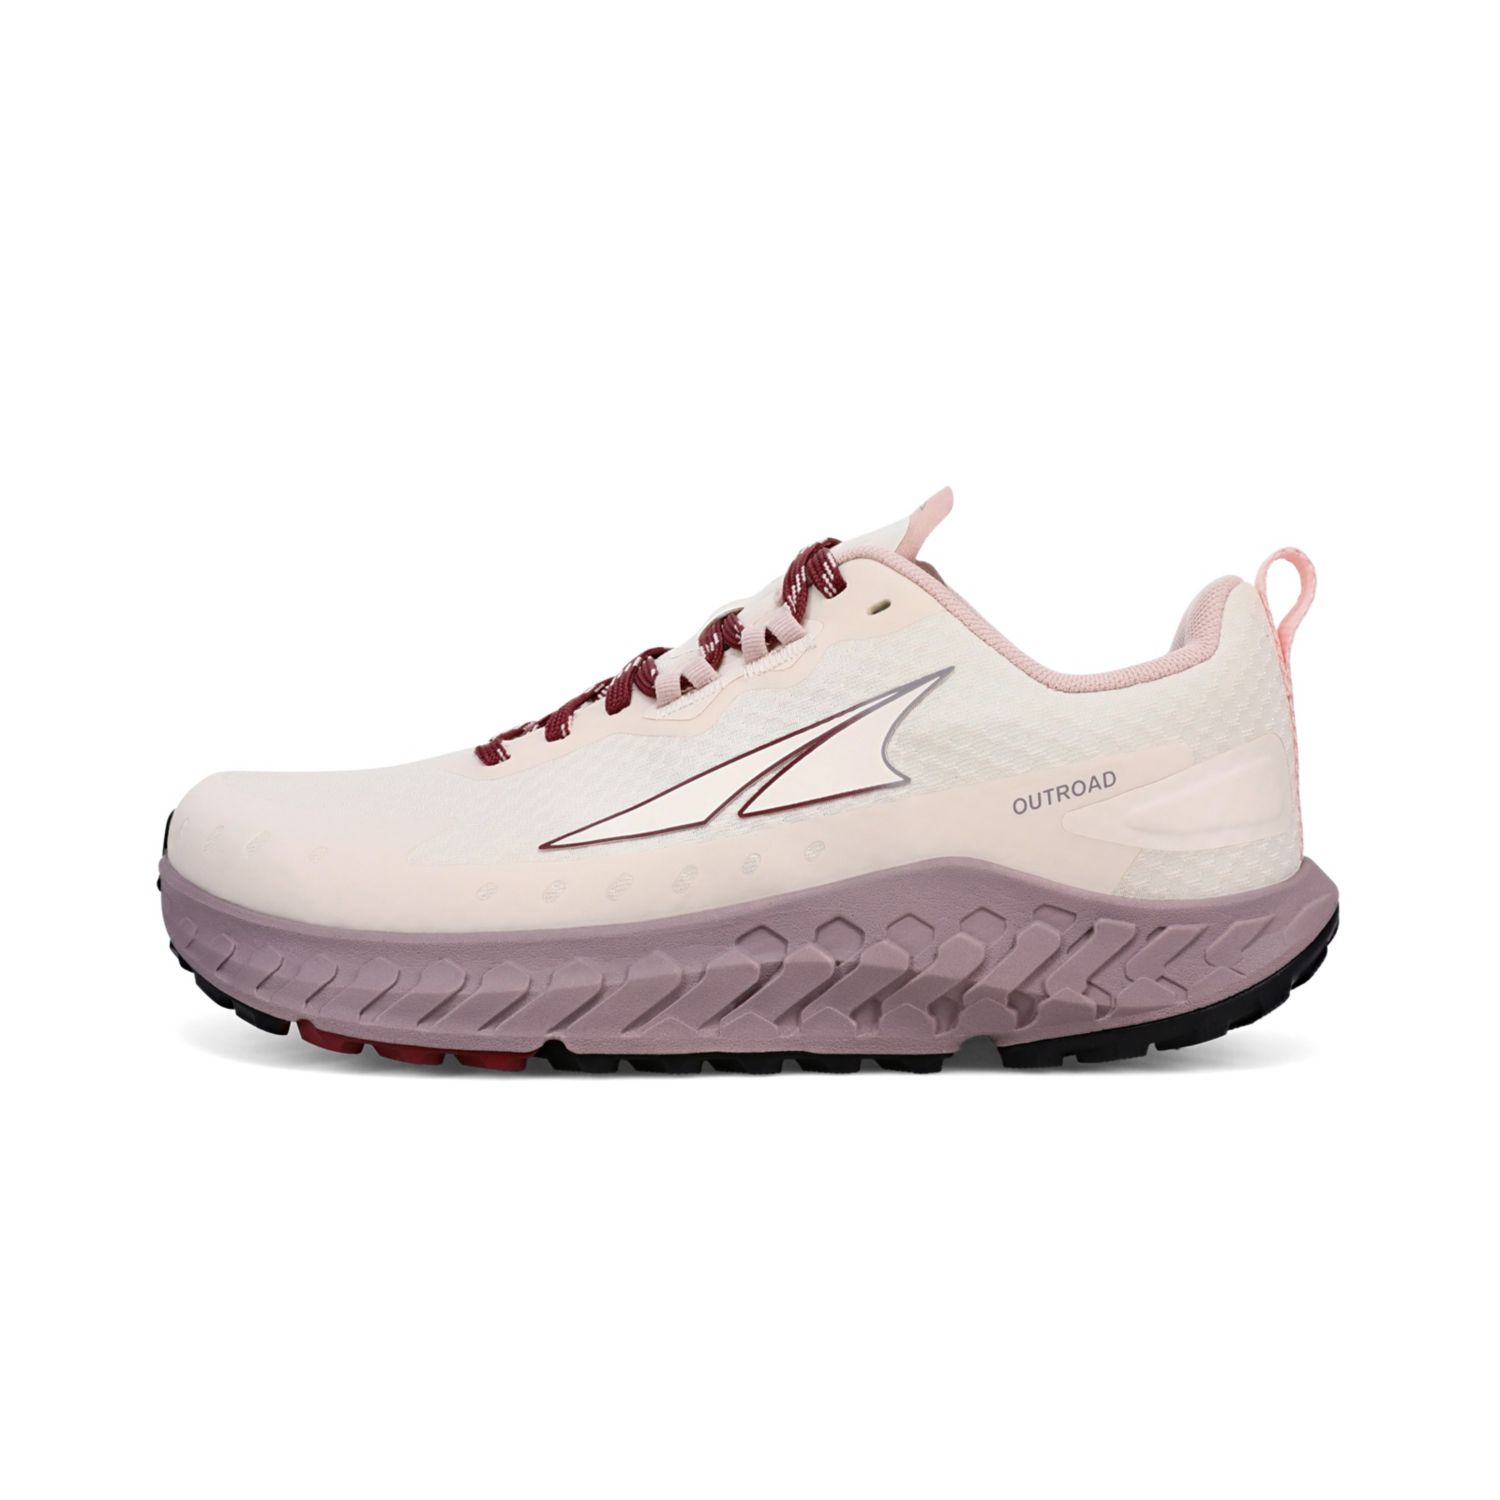 White Altra Outroad Women's Road Running Shoes | Ireland-70456199